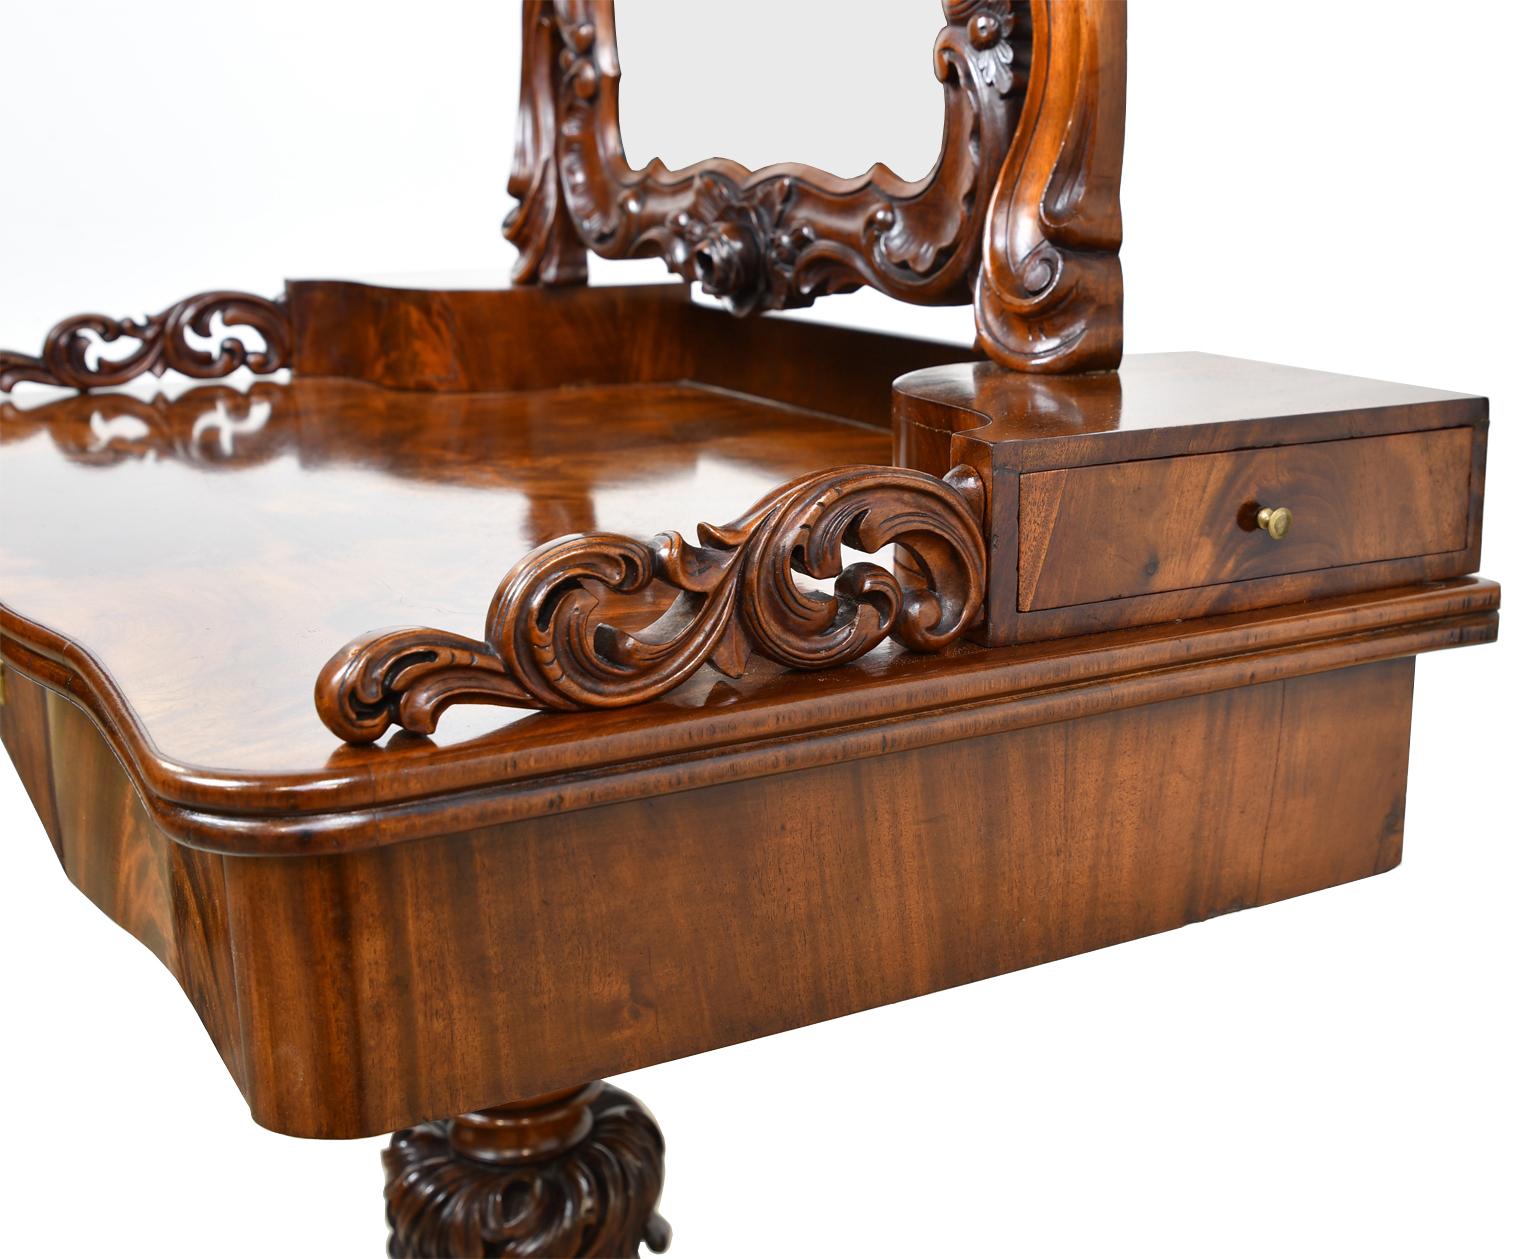 Antique Karl Johan Dressing Table/Vanity & Mirror in Mahogany w/ Rococo Carvings For Sale 7